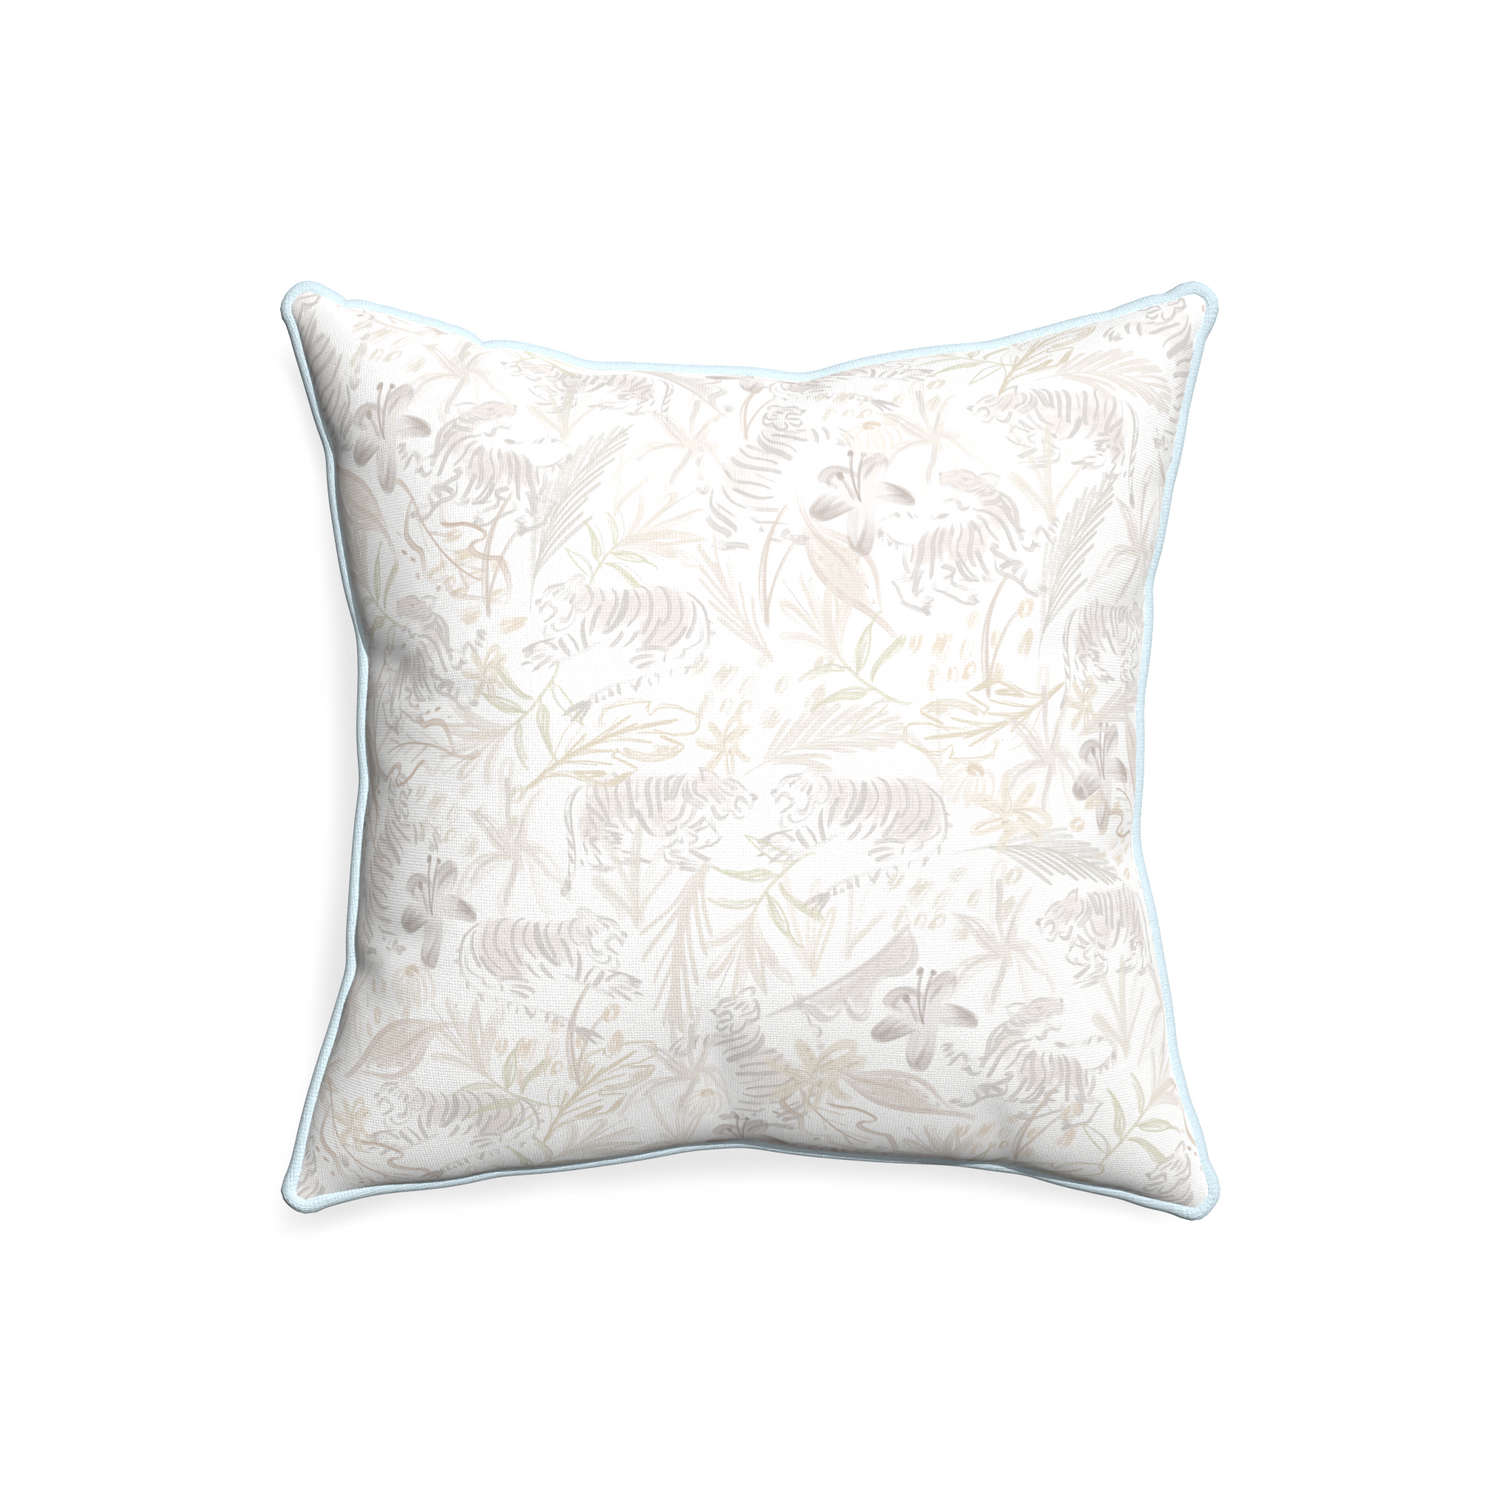 20-square frida sand custom beige chinoiserie tigerpillow with powder piping on white background